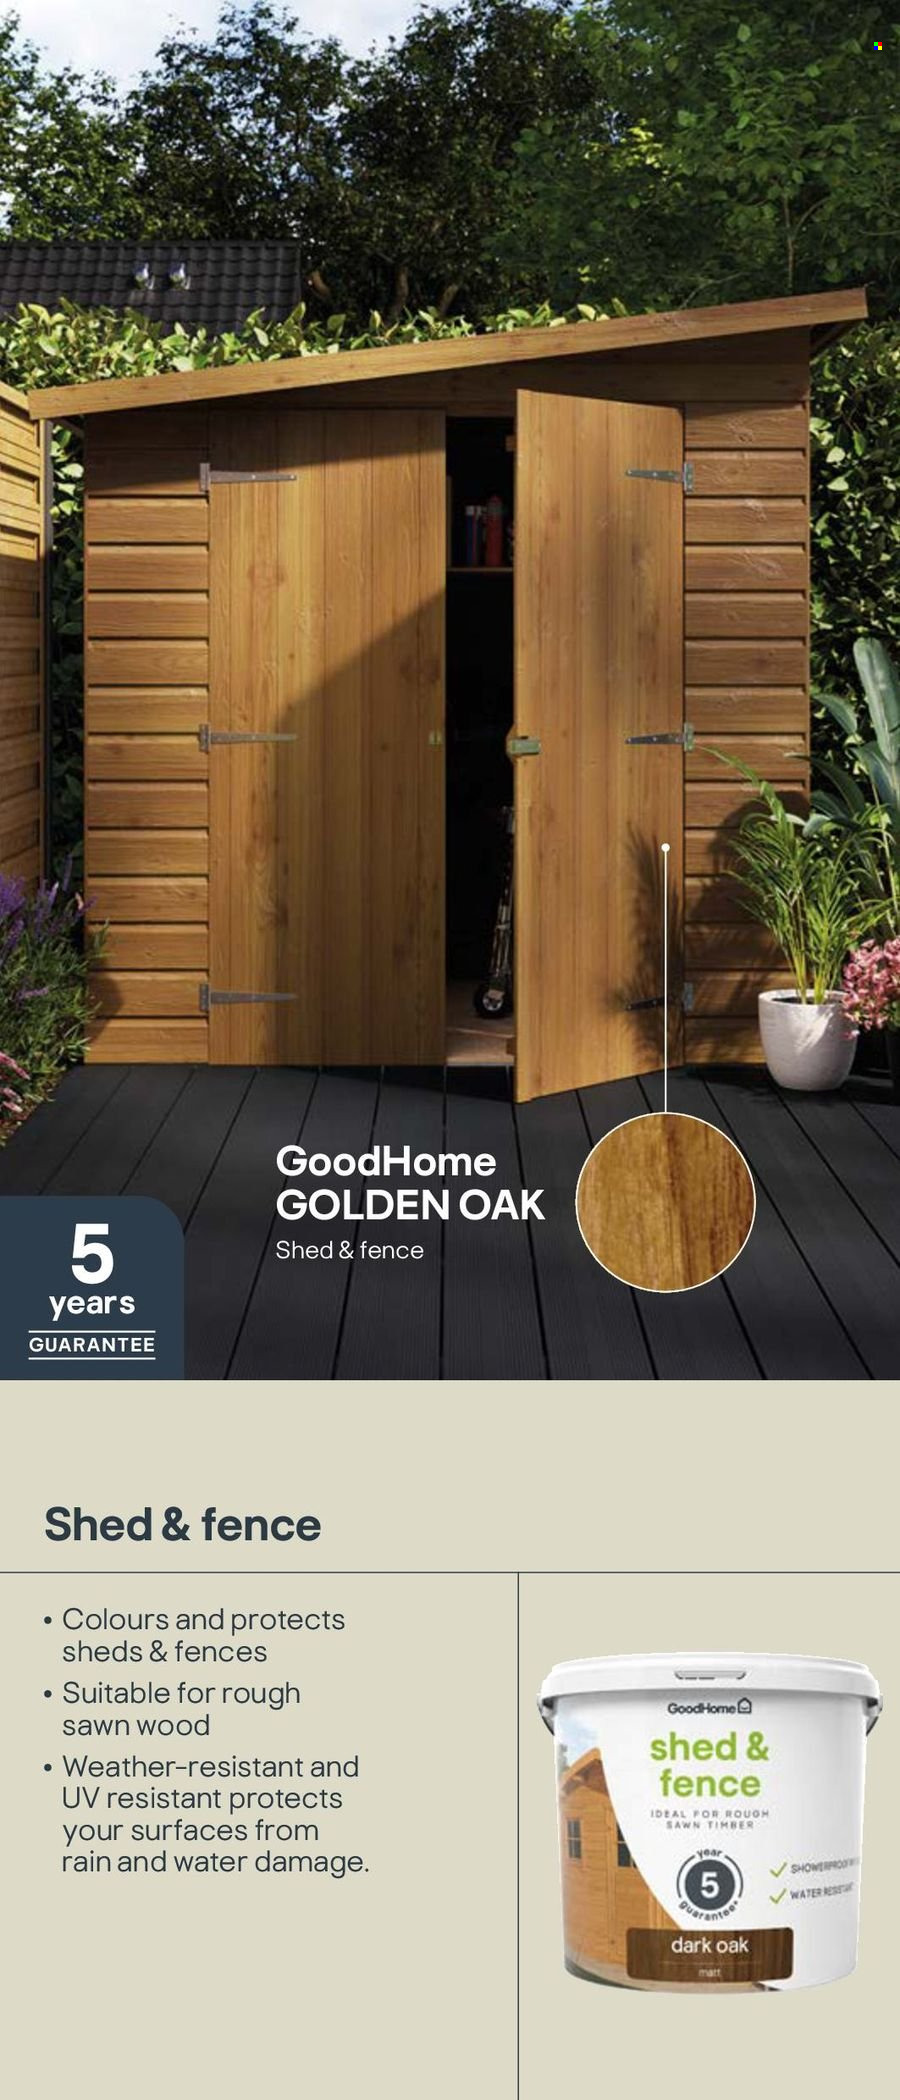 B&Q offer . Page 17.